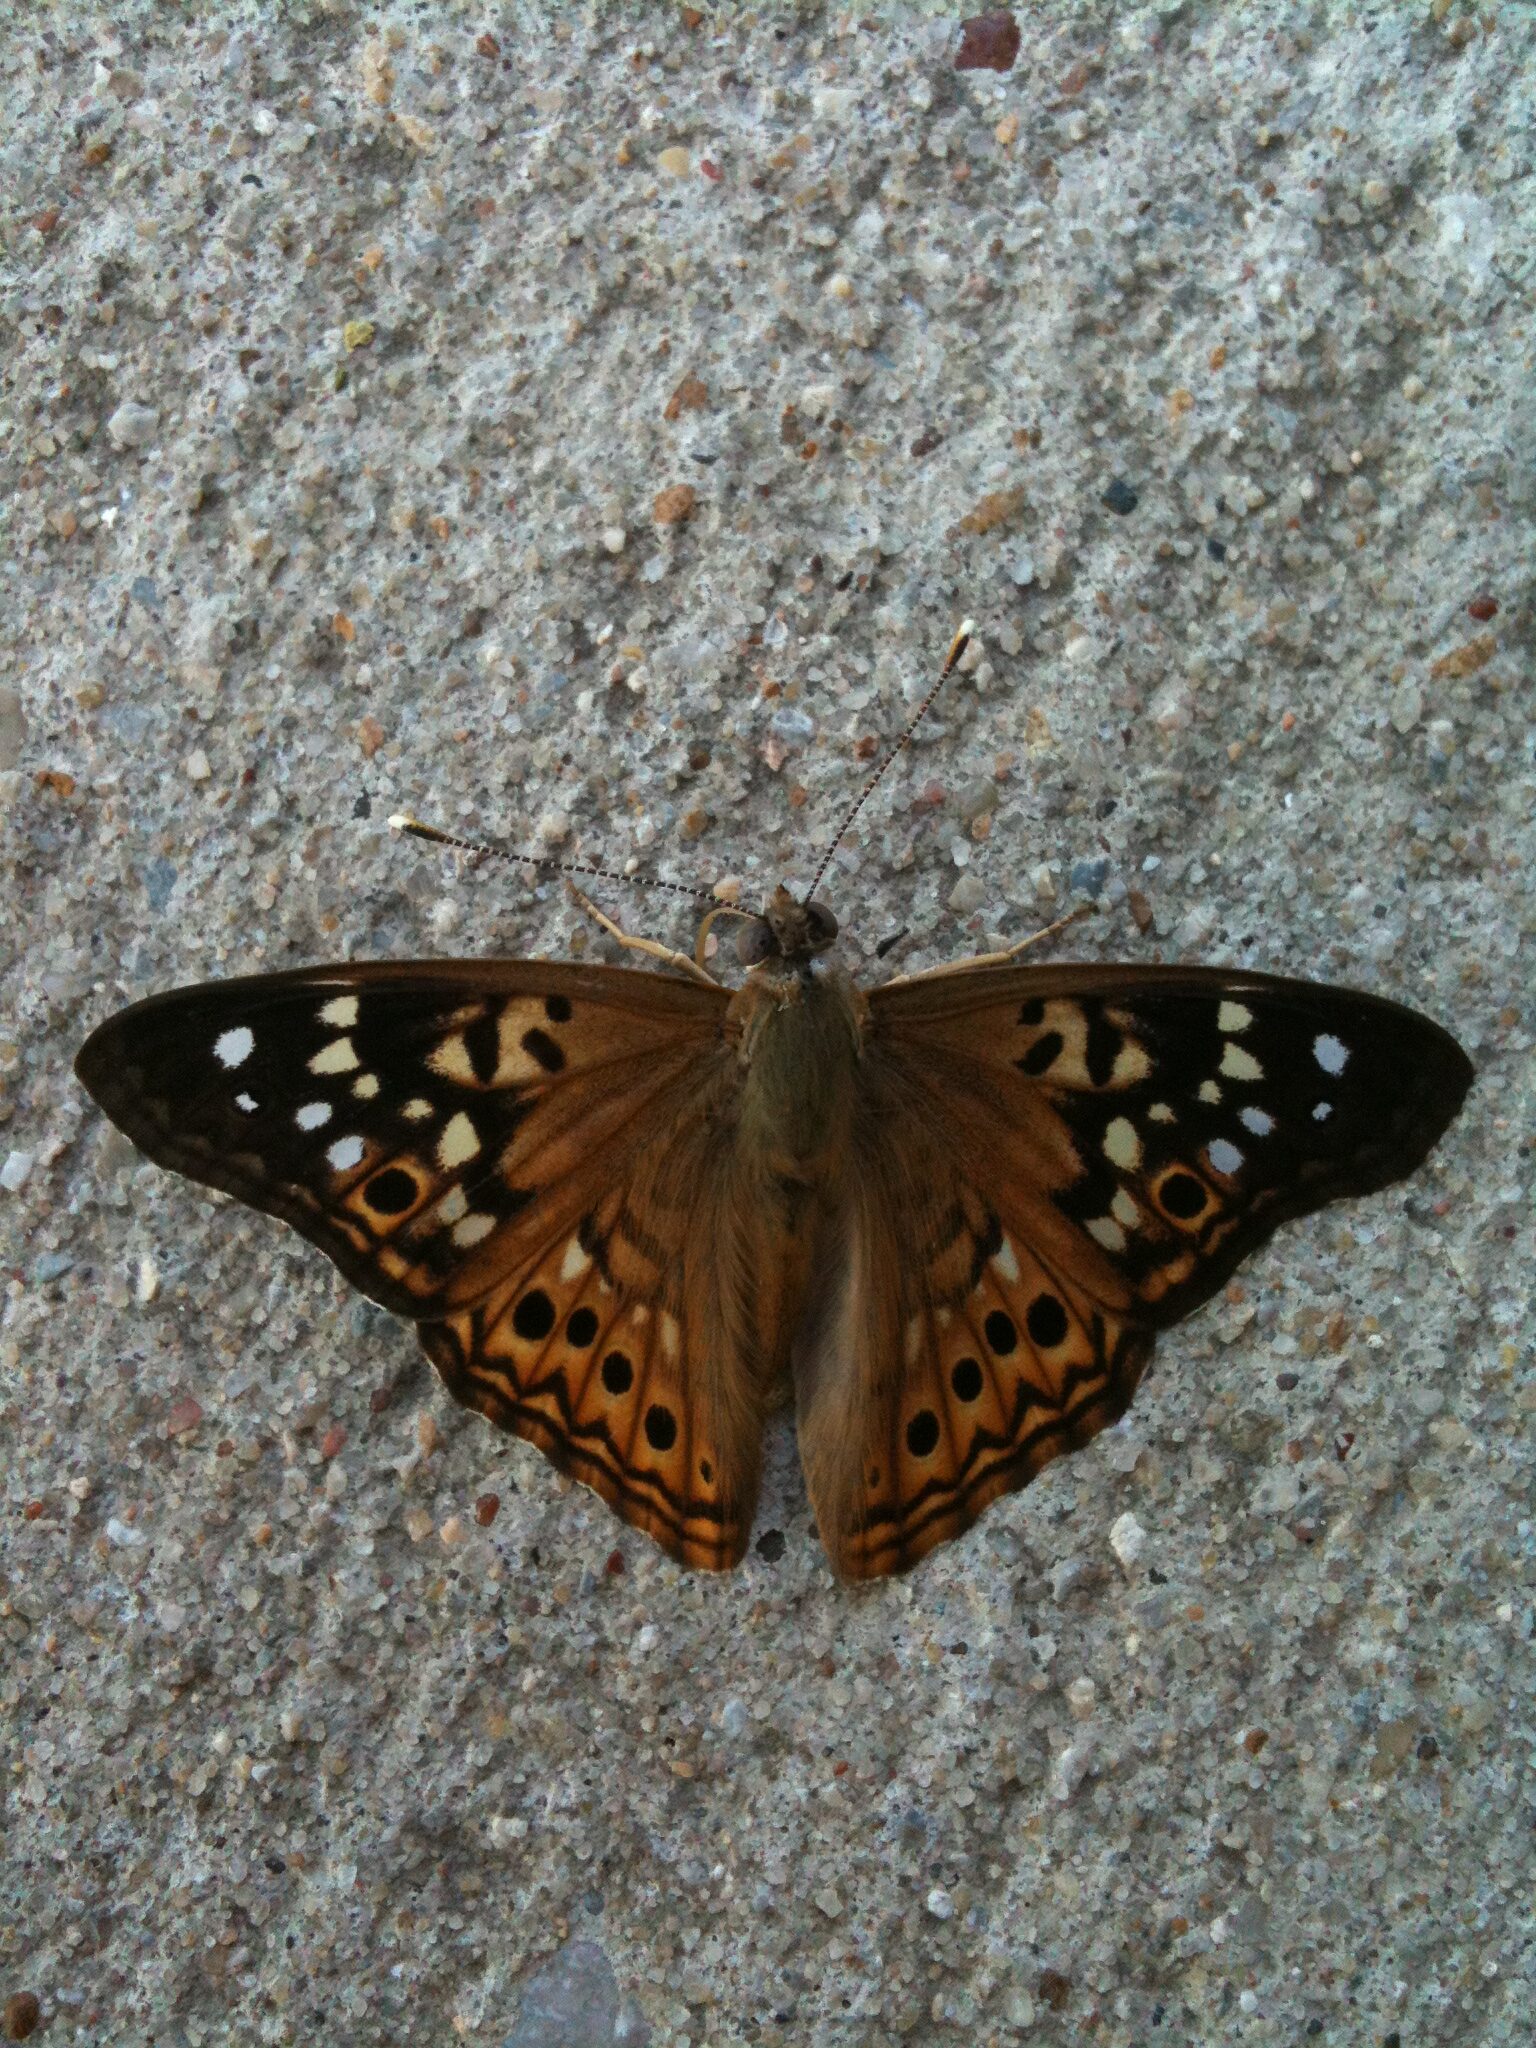 A picture of a butterfly or moth of some type on a stone.